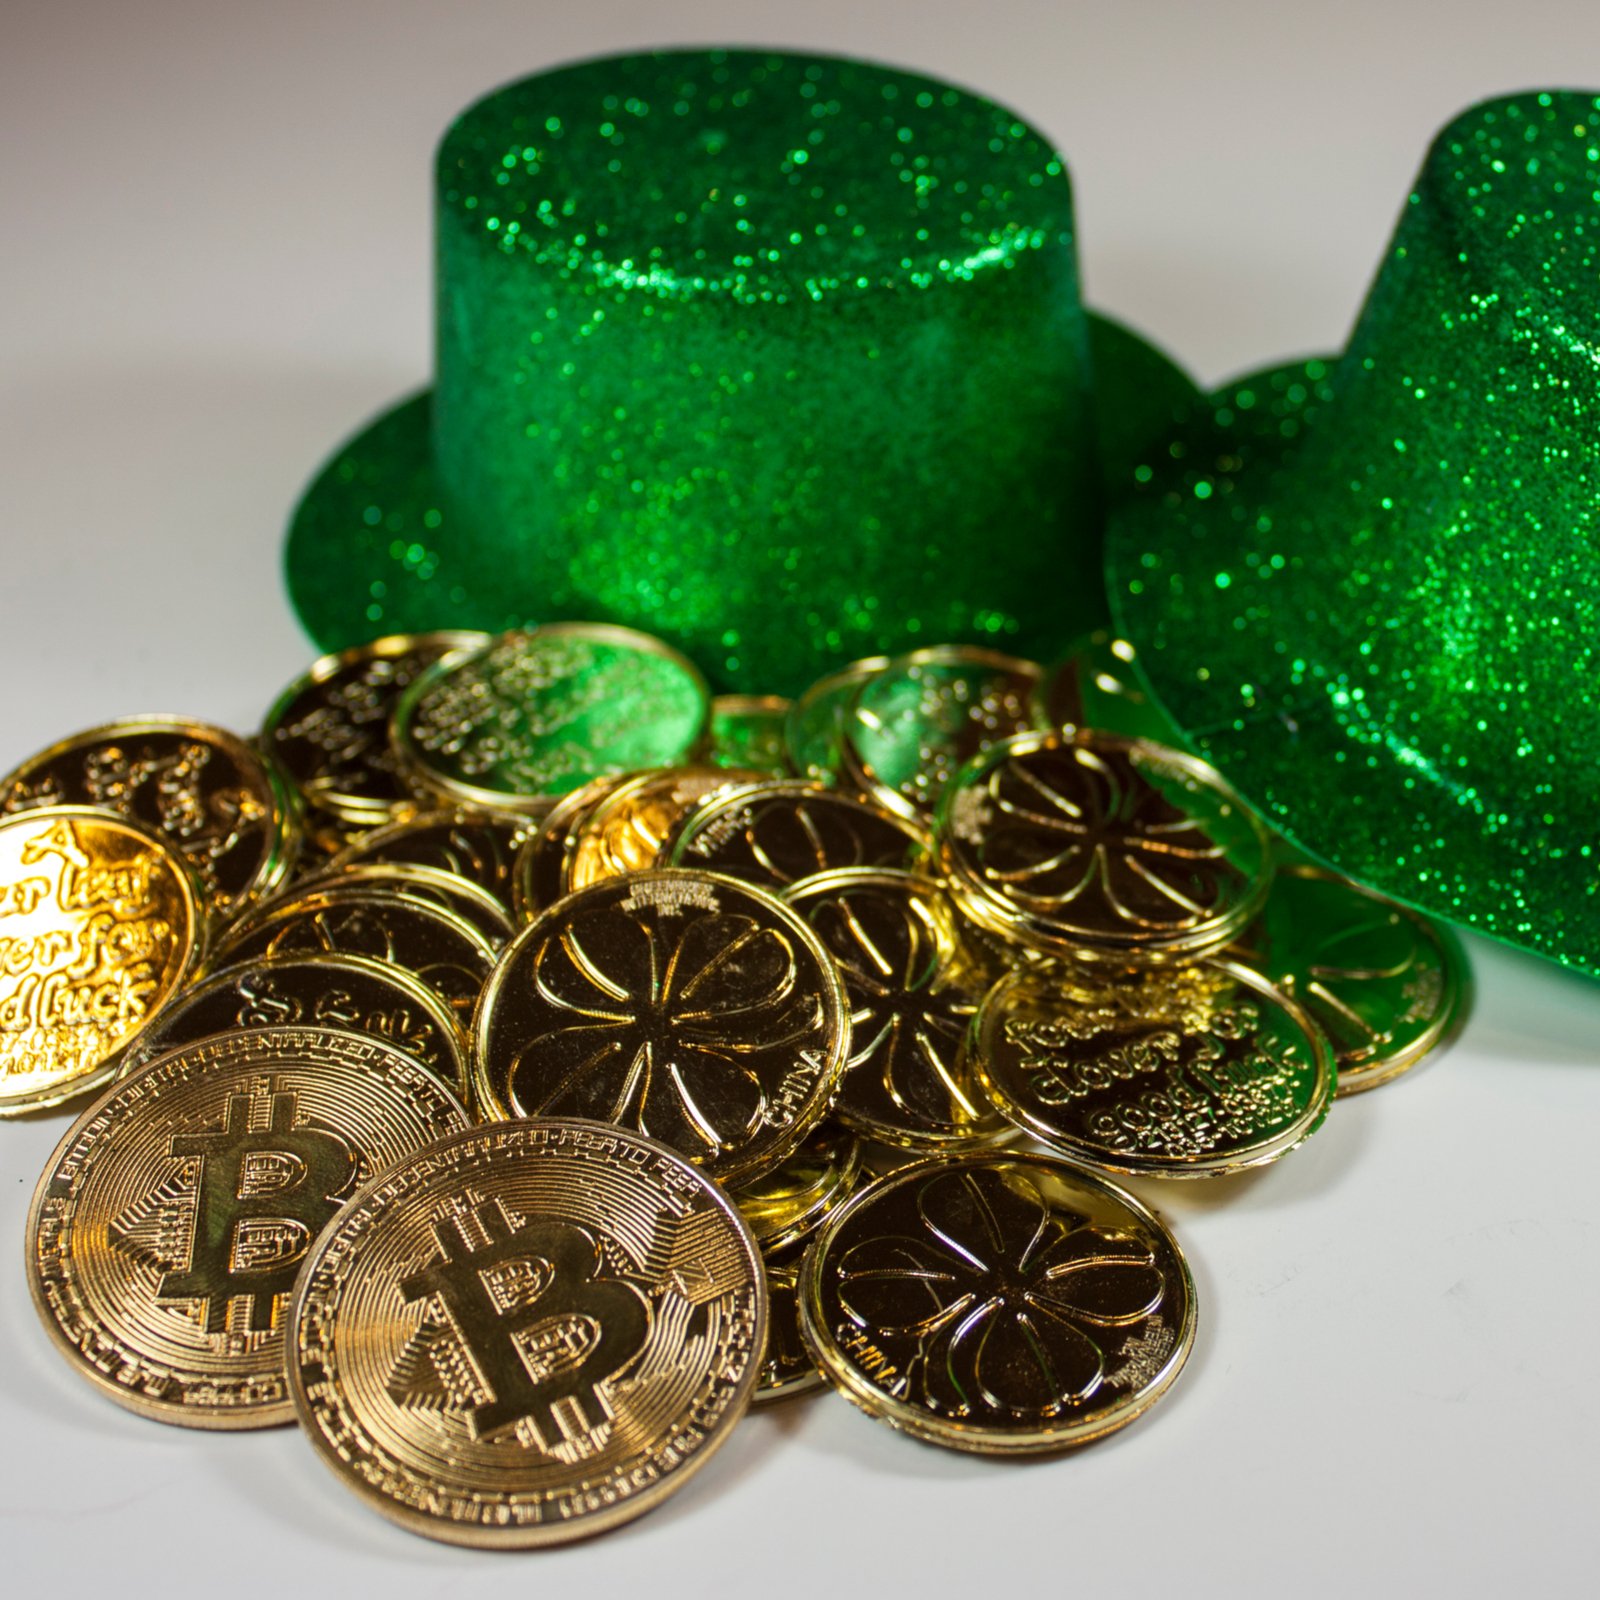 Irish coin cryptocurrency buy bitcoin with credit card lowest fees